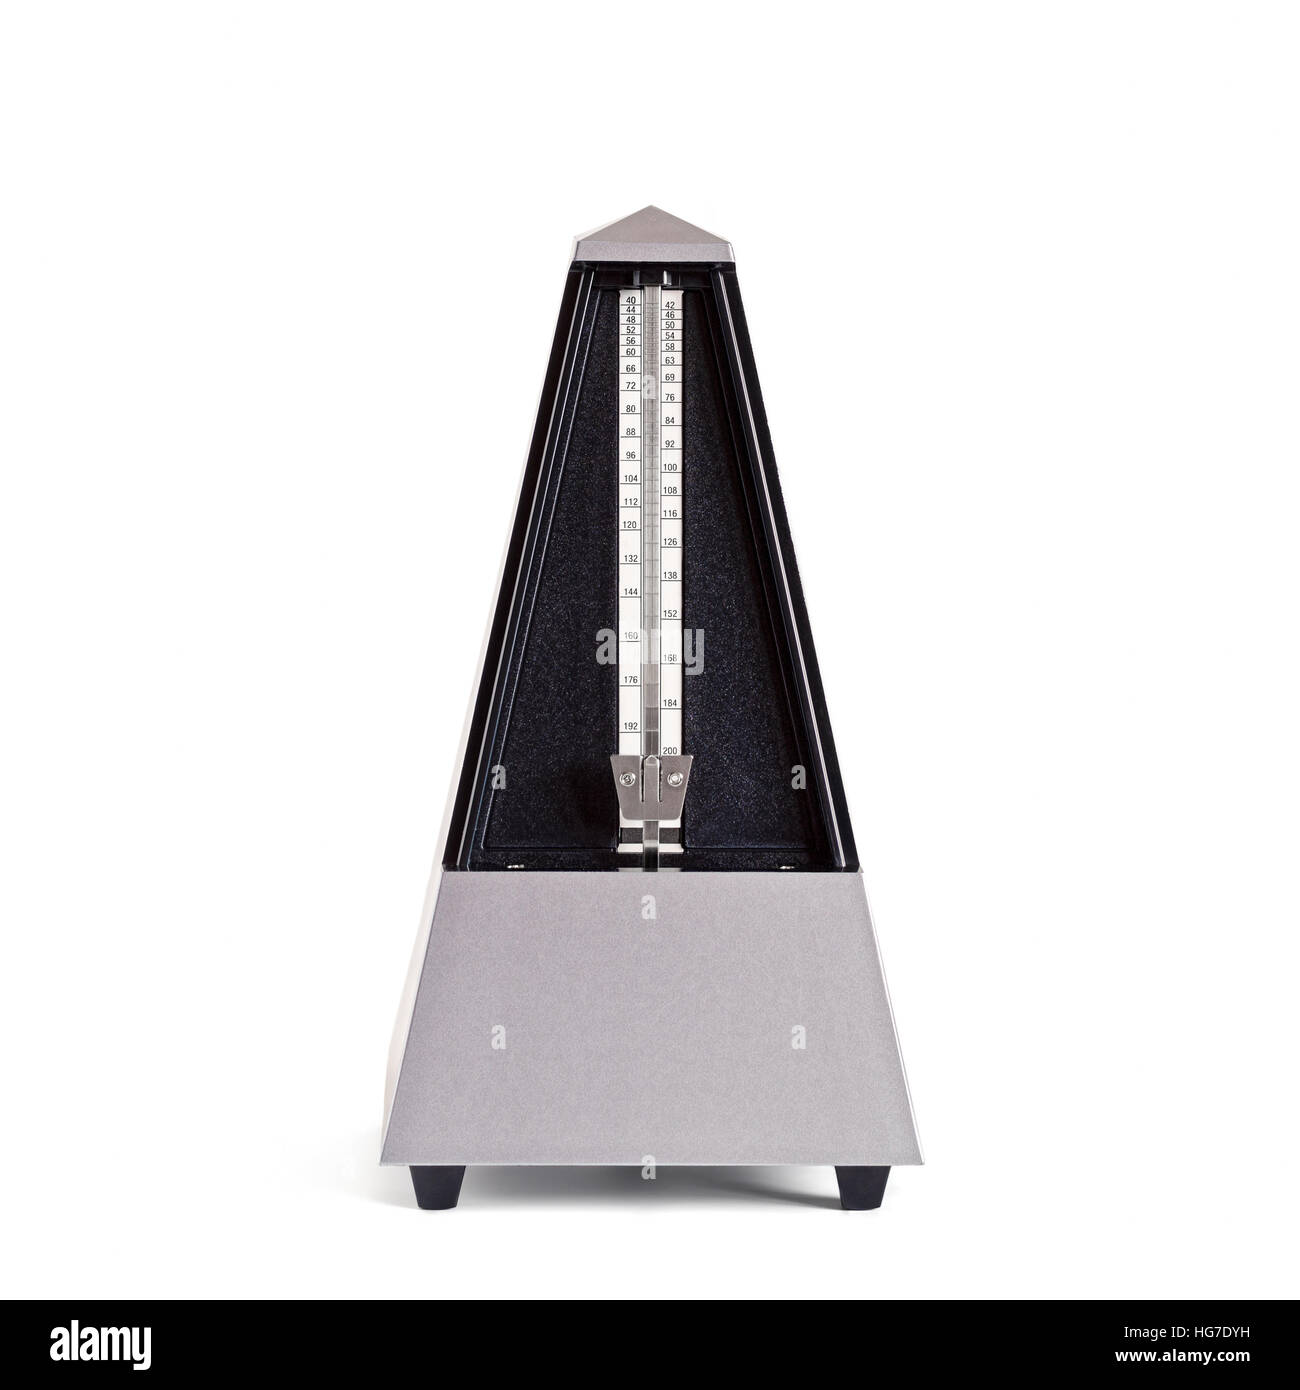 Stopped pyramid shaped metronome in plastic housing isolated on white Stock Photo